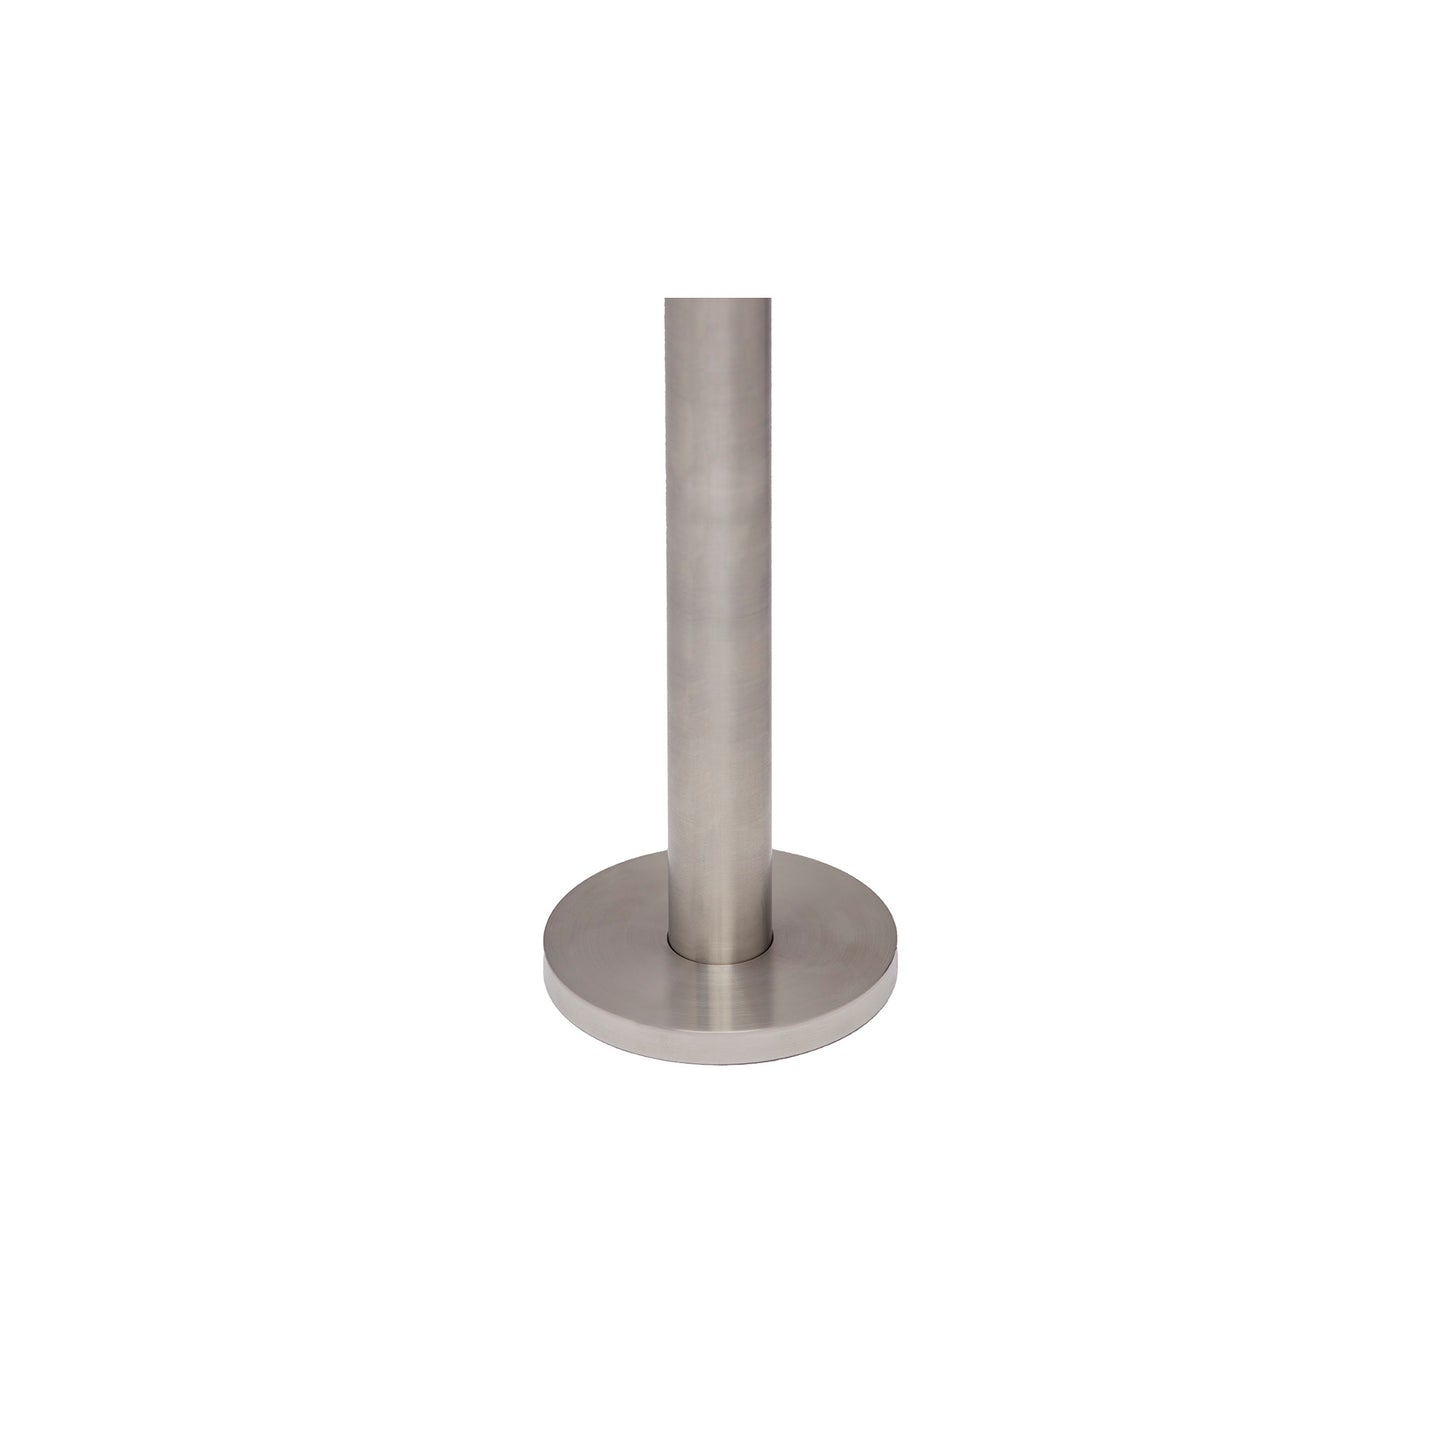 Large Surface Mounted Stanchion - 868mm high